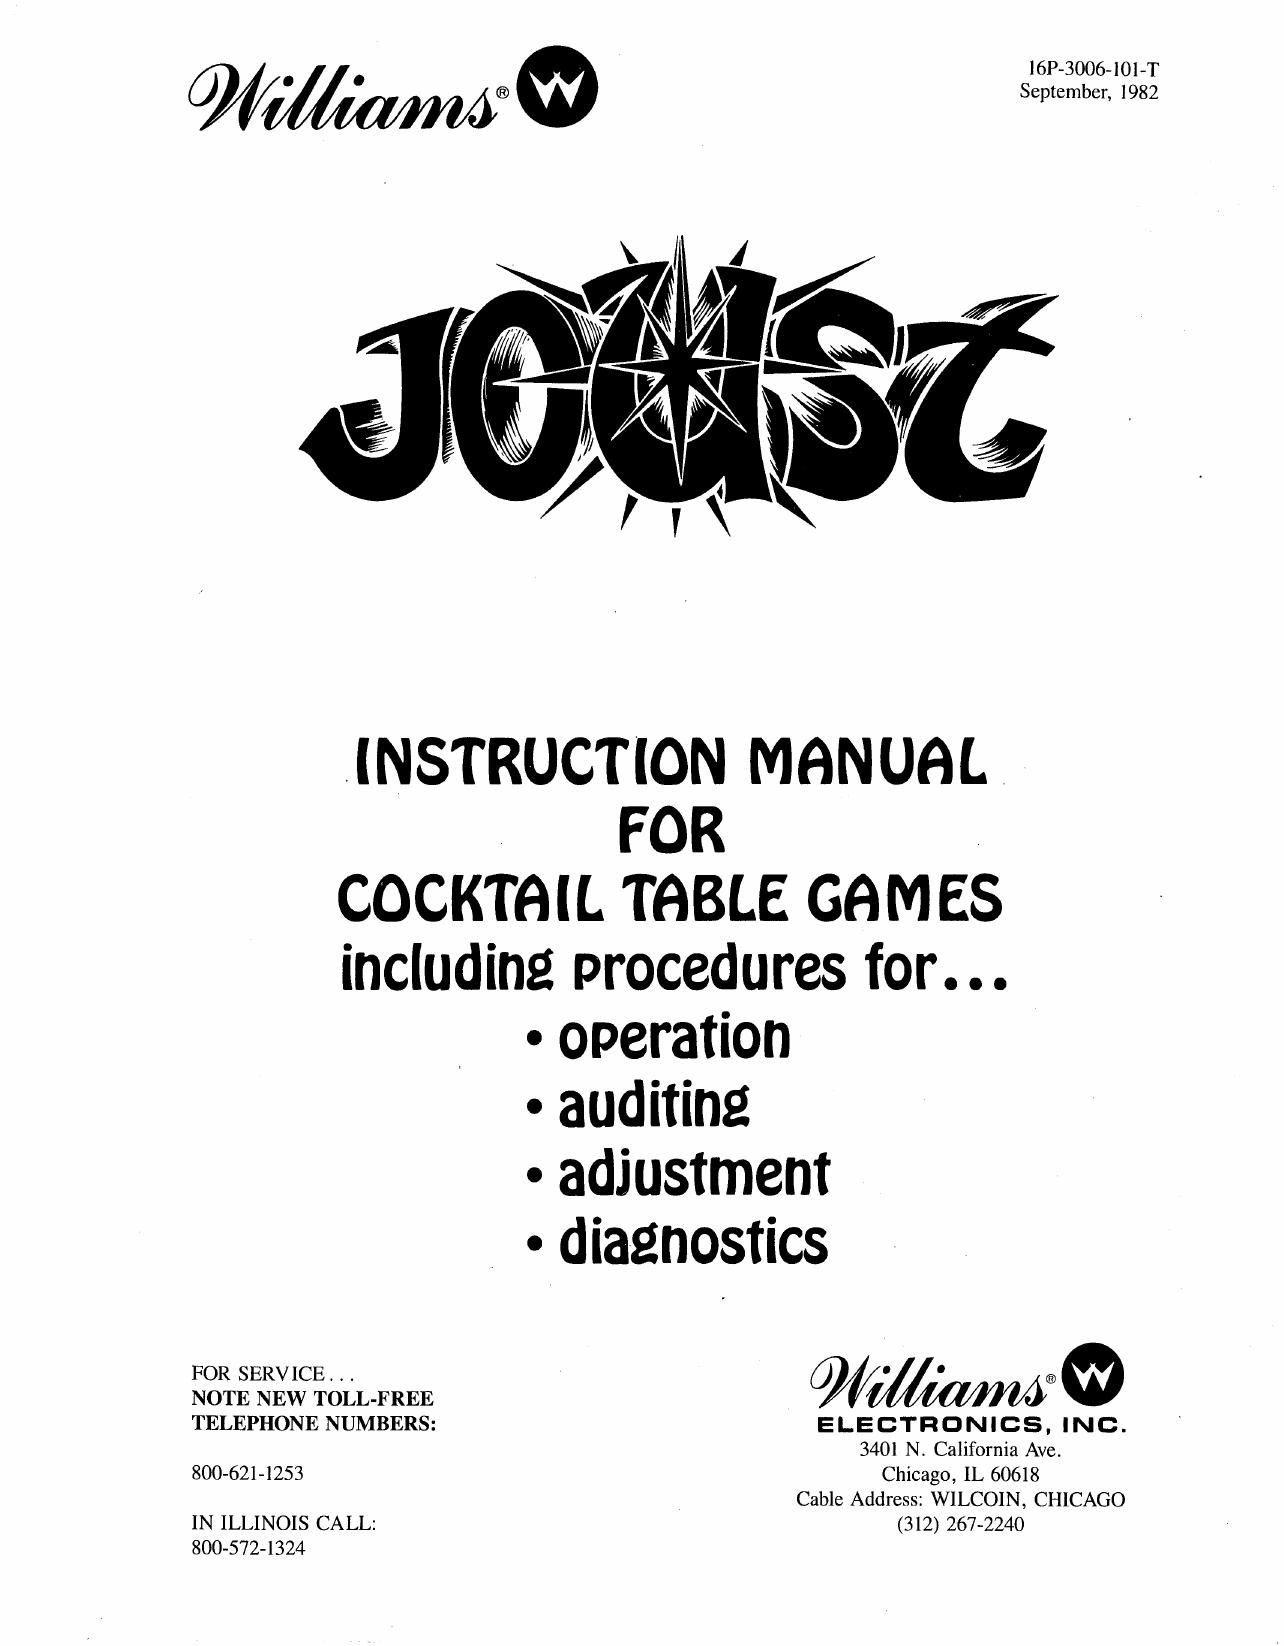 Joust Instruction Manual For Cocktail Table Games (16P-3006-101-T) Sept 1982